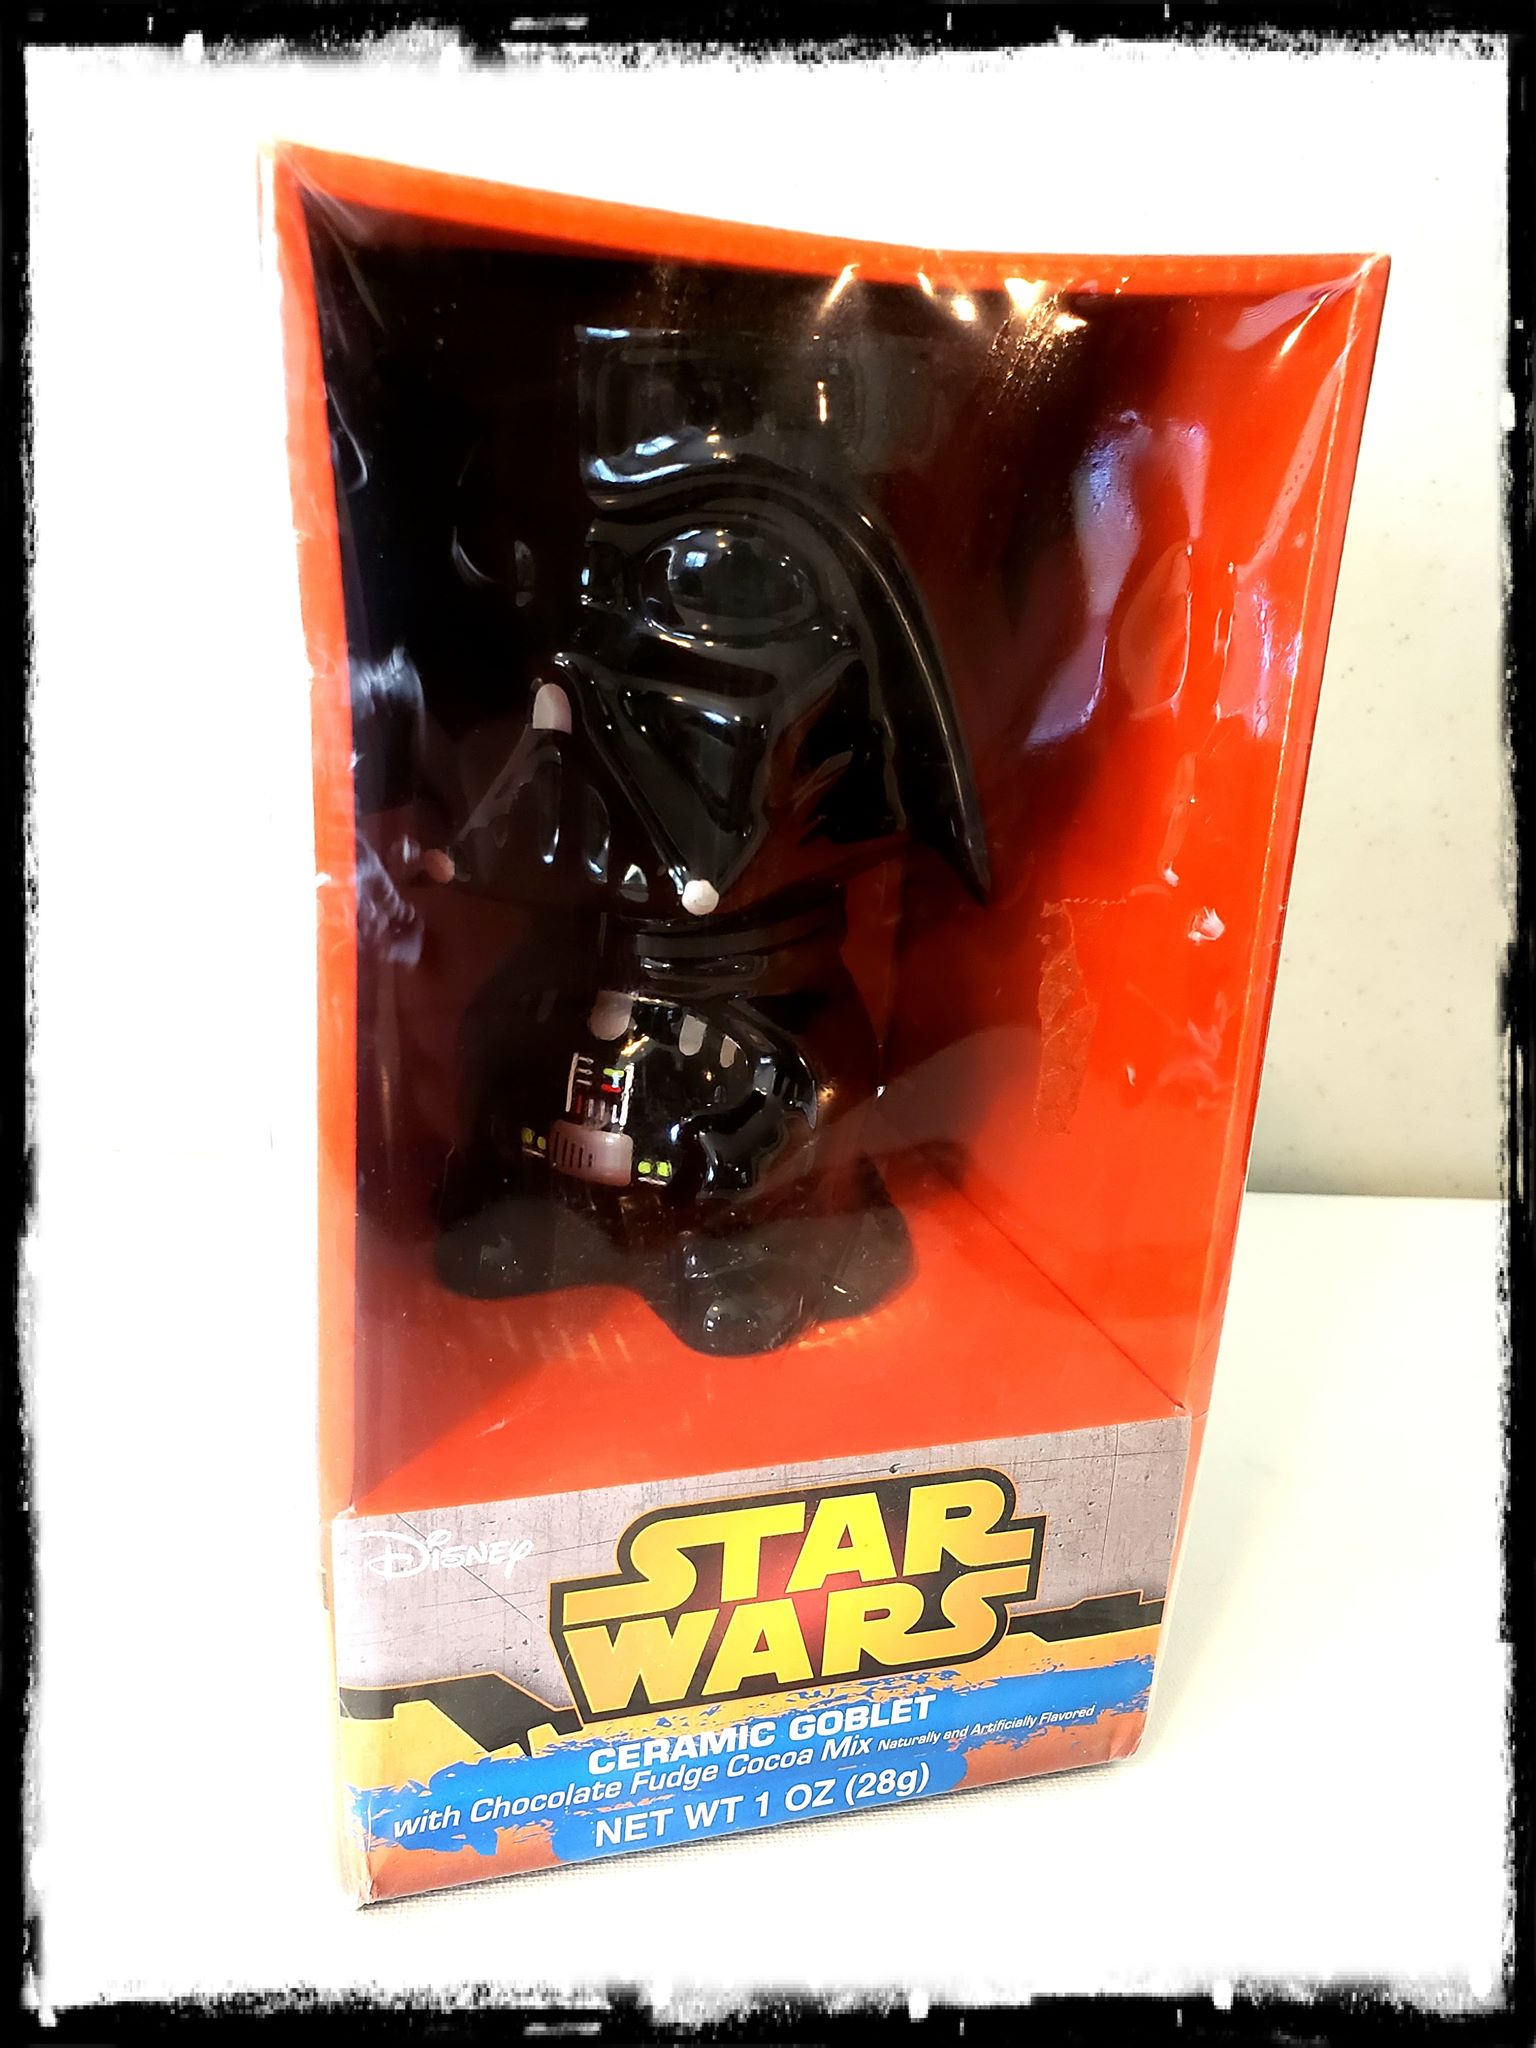 DISNEY STAR WARS DARTH VADER COLLECTIBLE CERAMIC GOBLET 7'' for Sale in Los  Angeles, CA - OfferUp